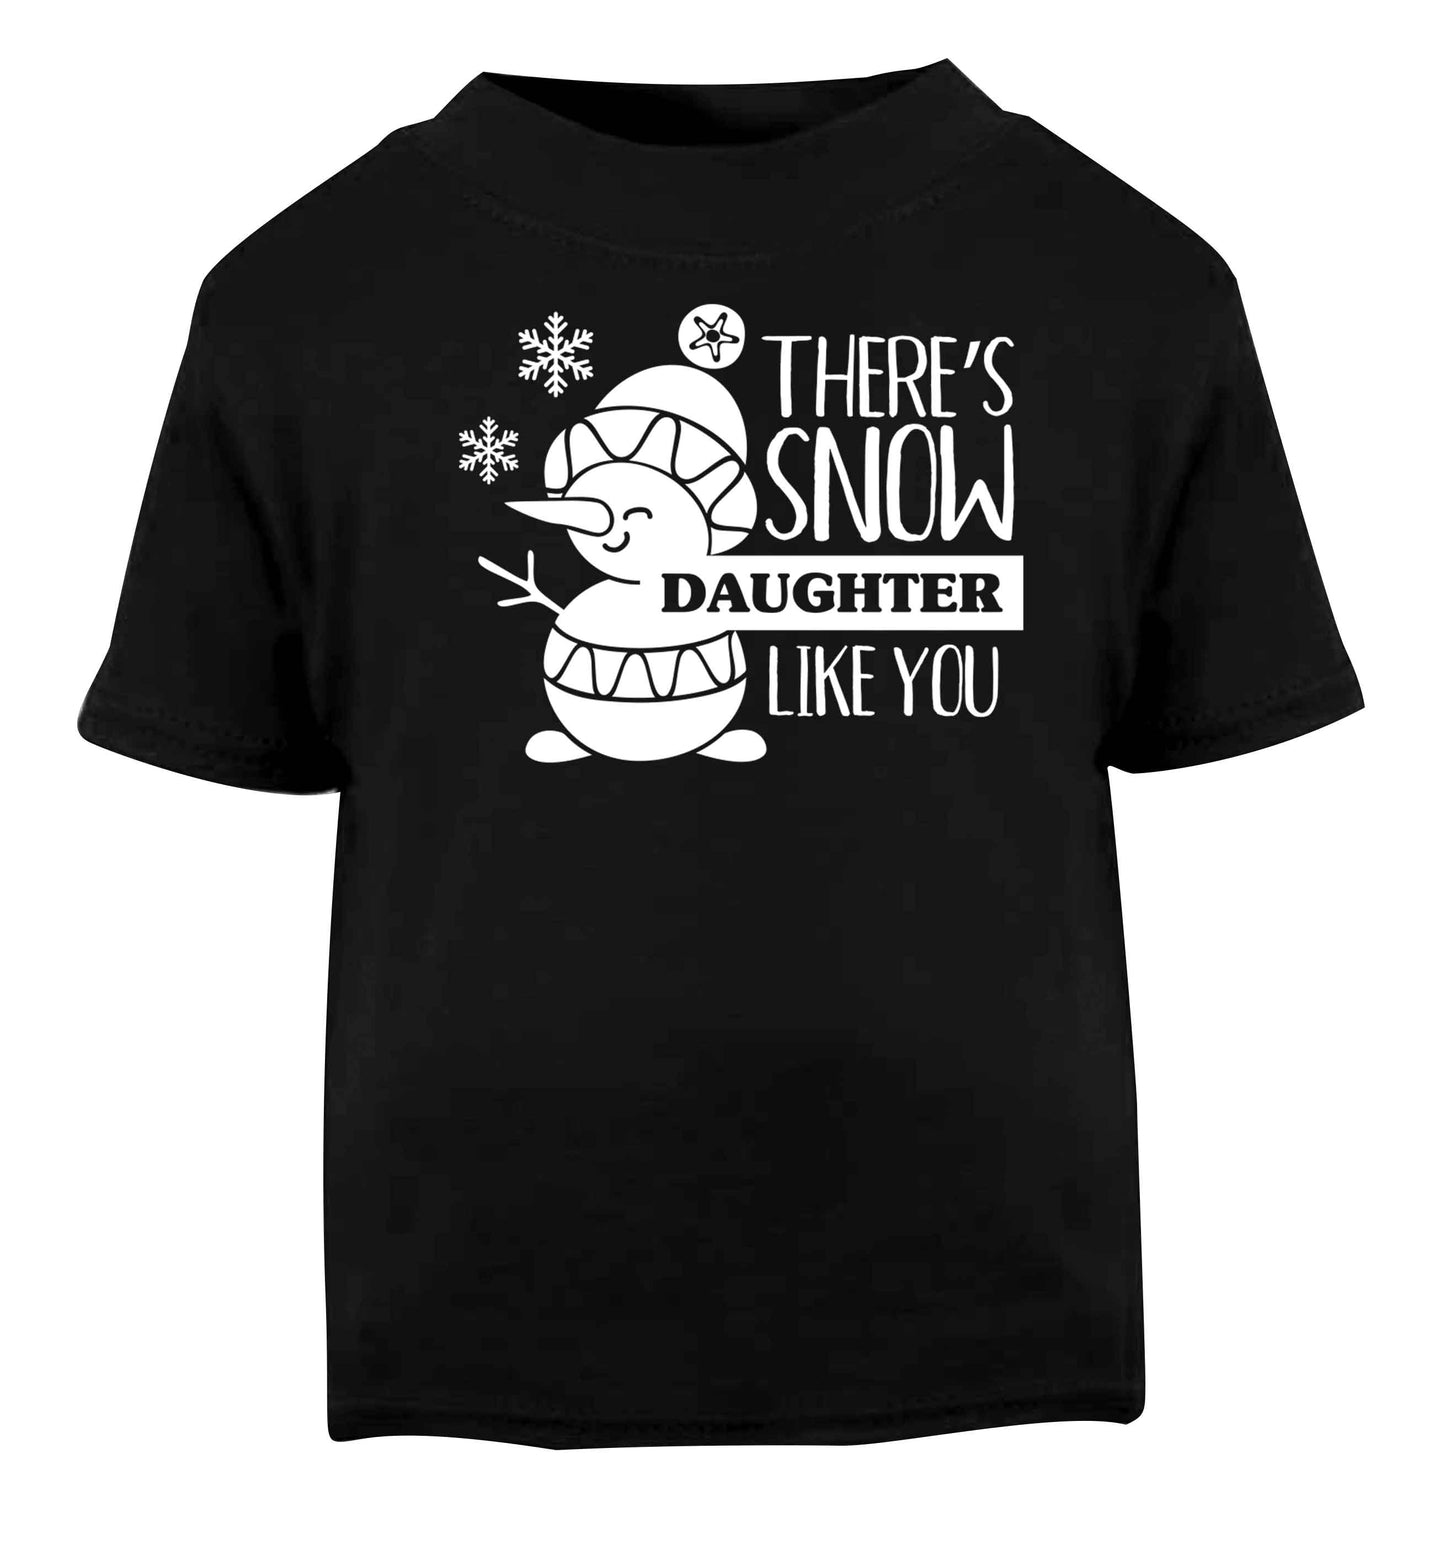 There's snow daughter like you Black baby toddler Tshirt 2 years